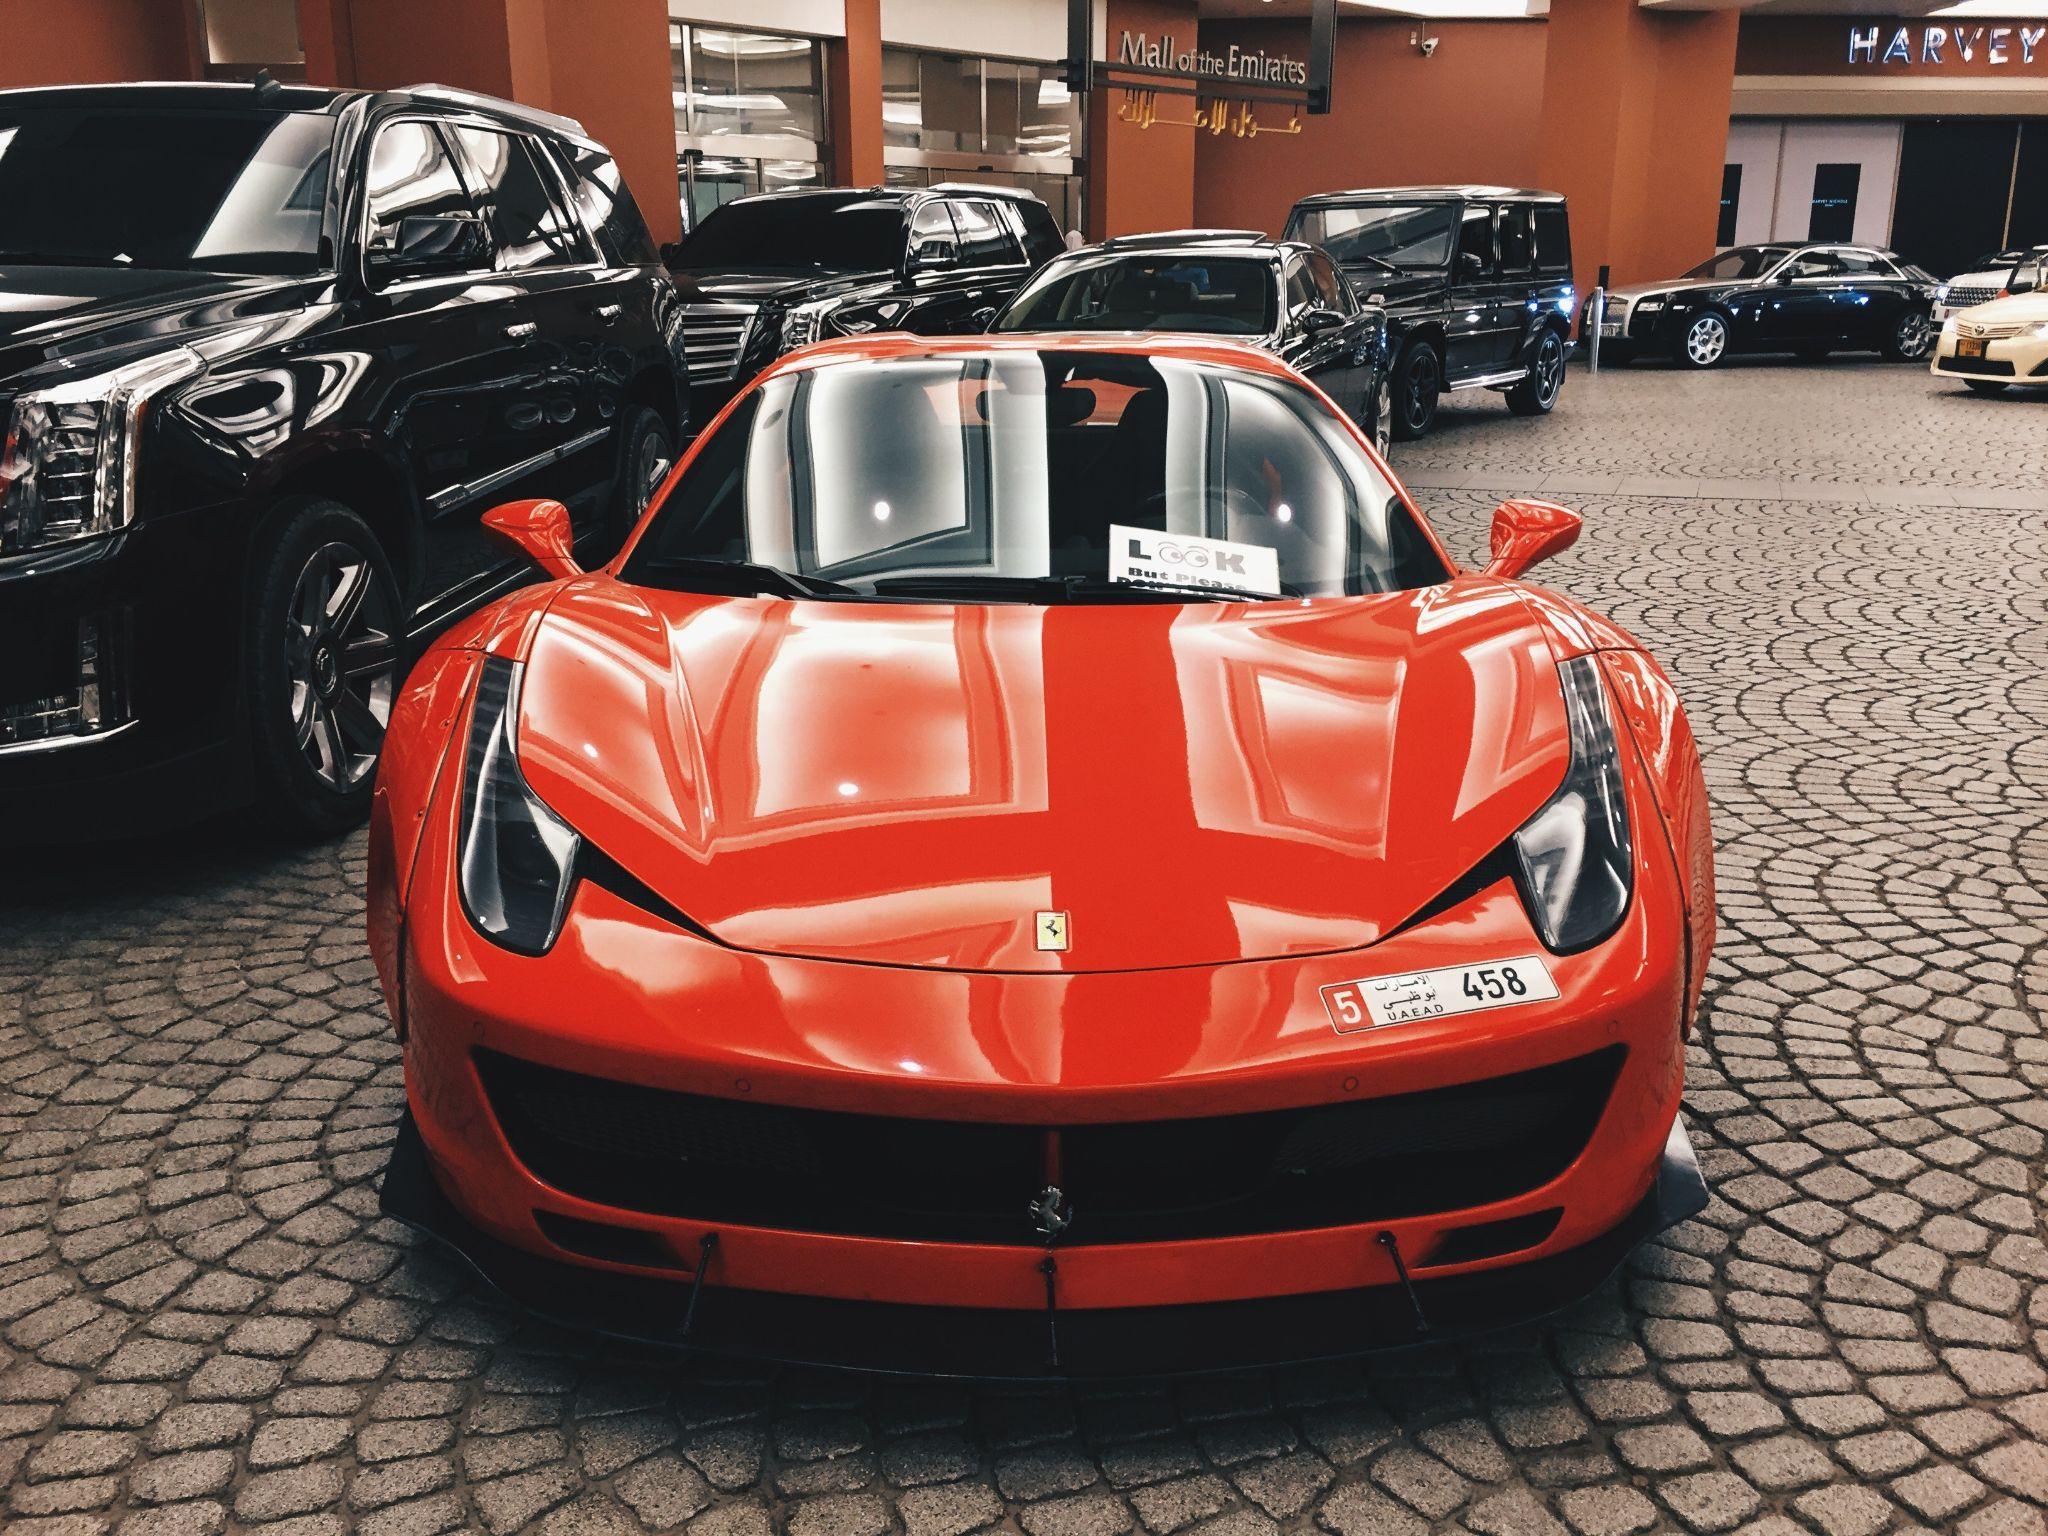 picture of a red ferrari with other cars in the background.